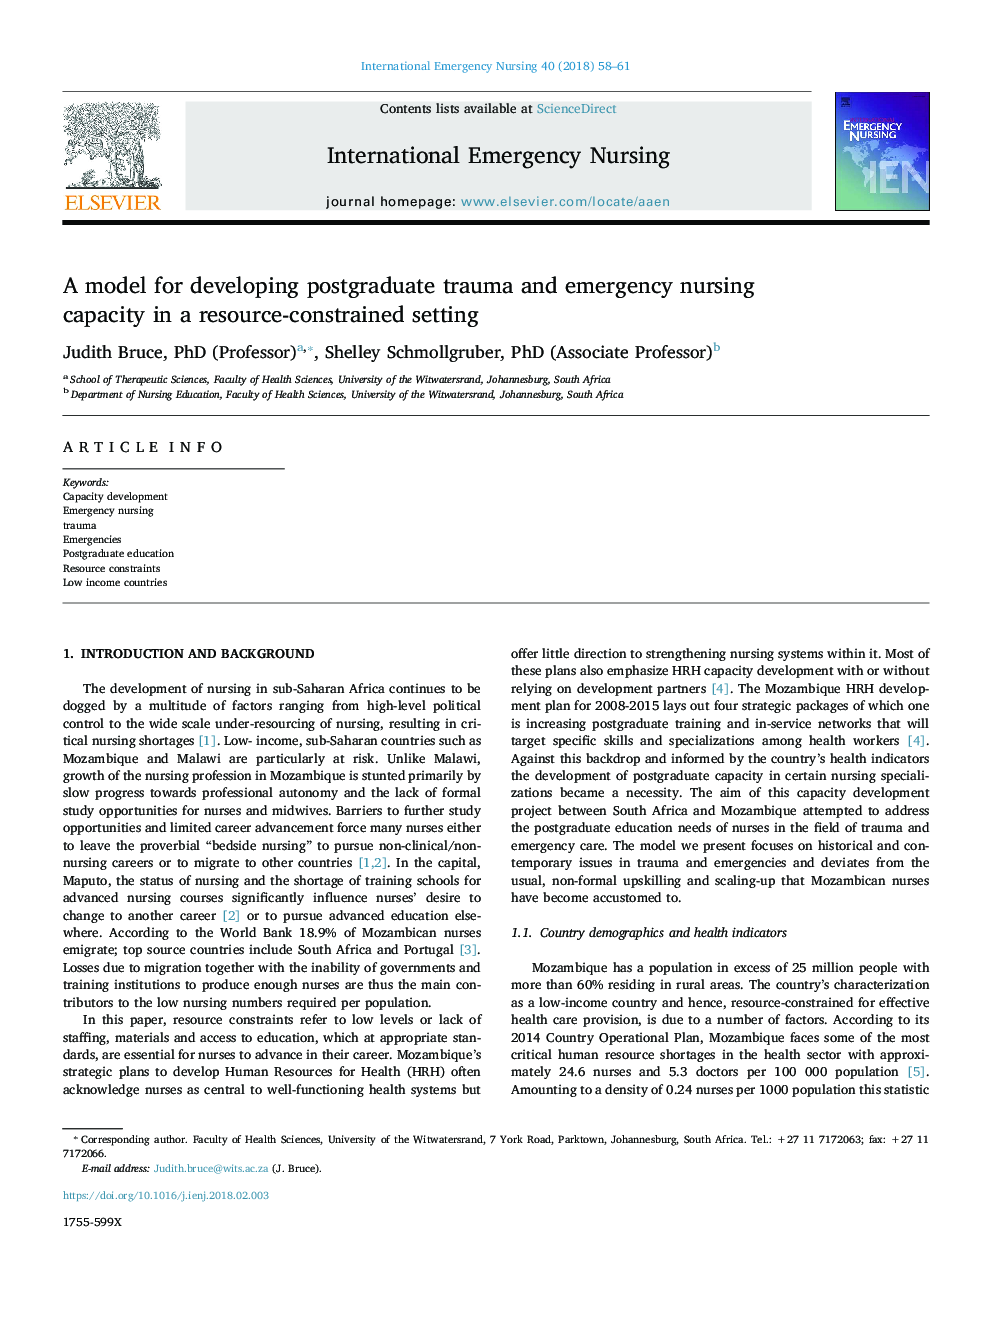 A model for developing postgraduate trauma and emergency nursing capacity in a resource-constrained setting